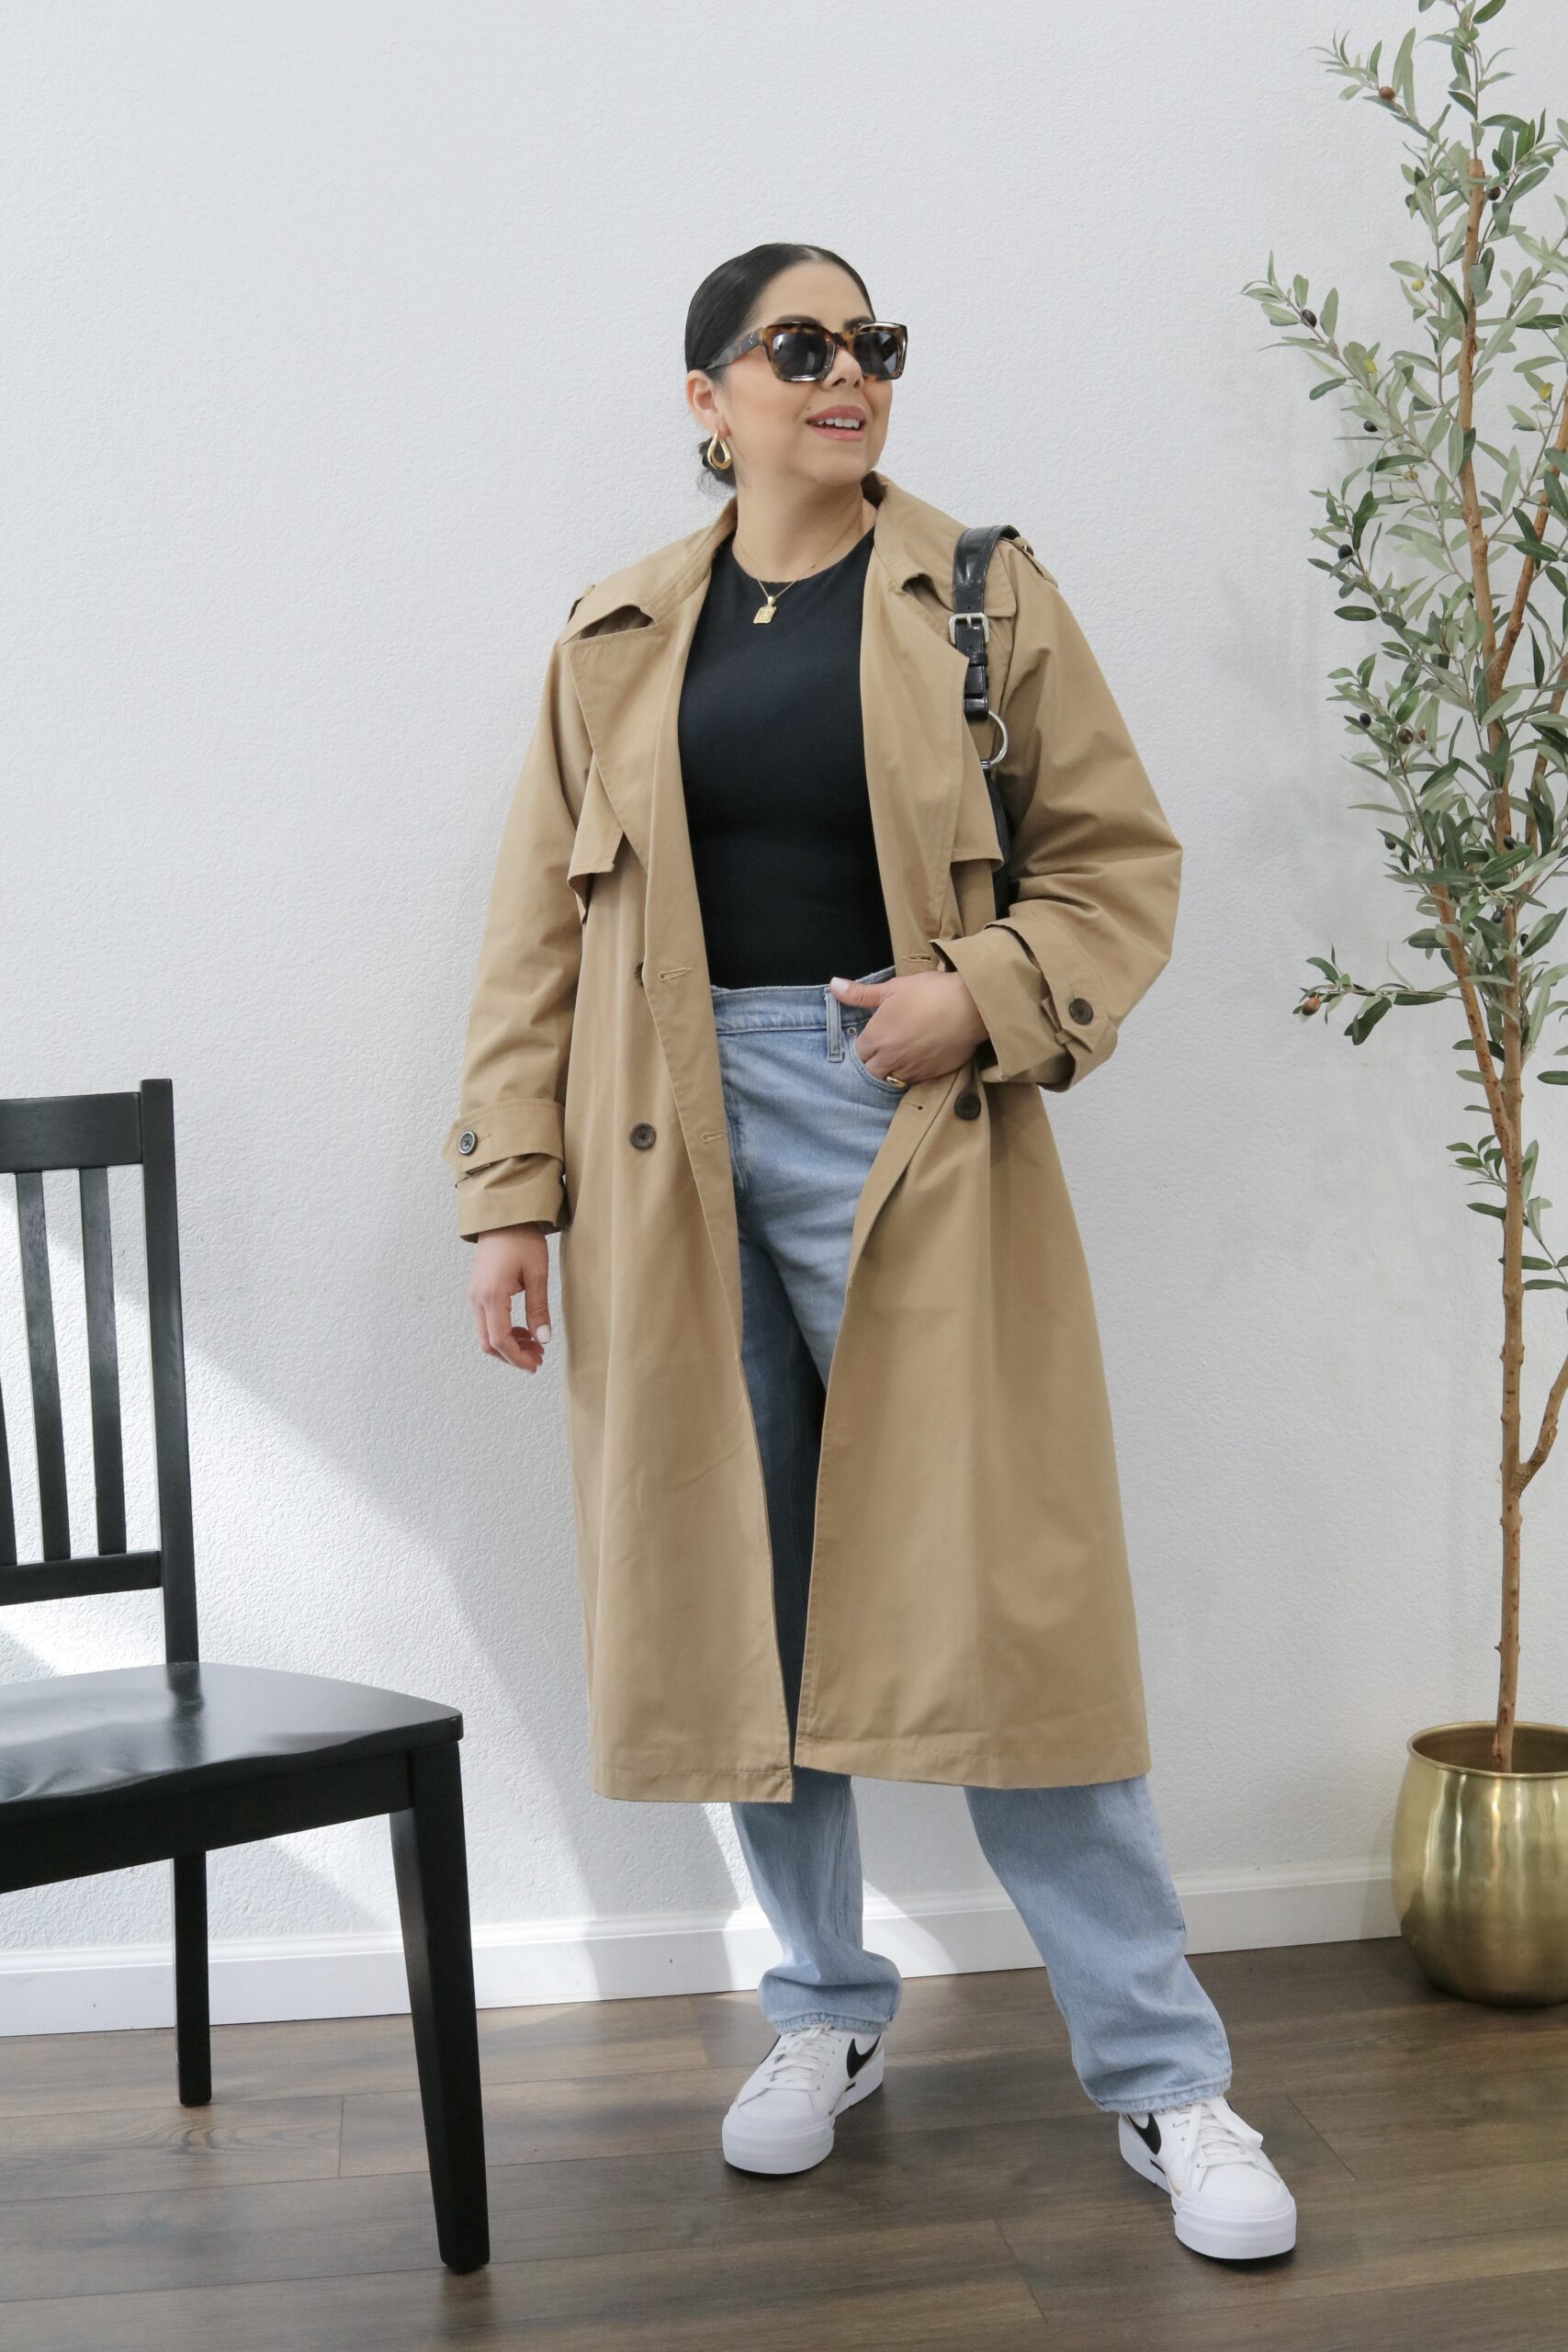 Sharing a Chic Faux Leather Trench Coat Outfit Idea for Women